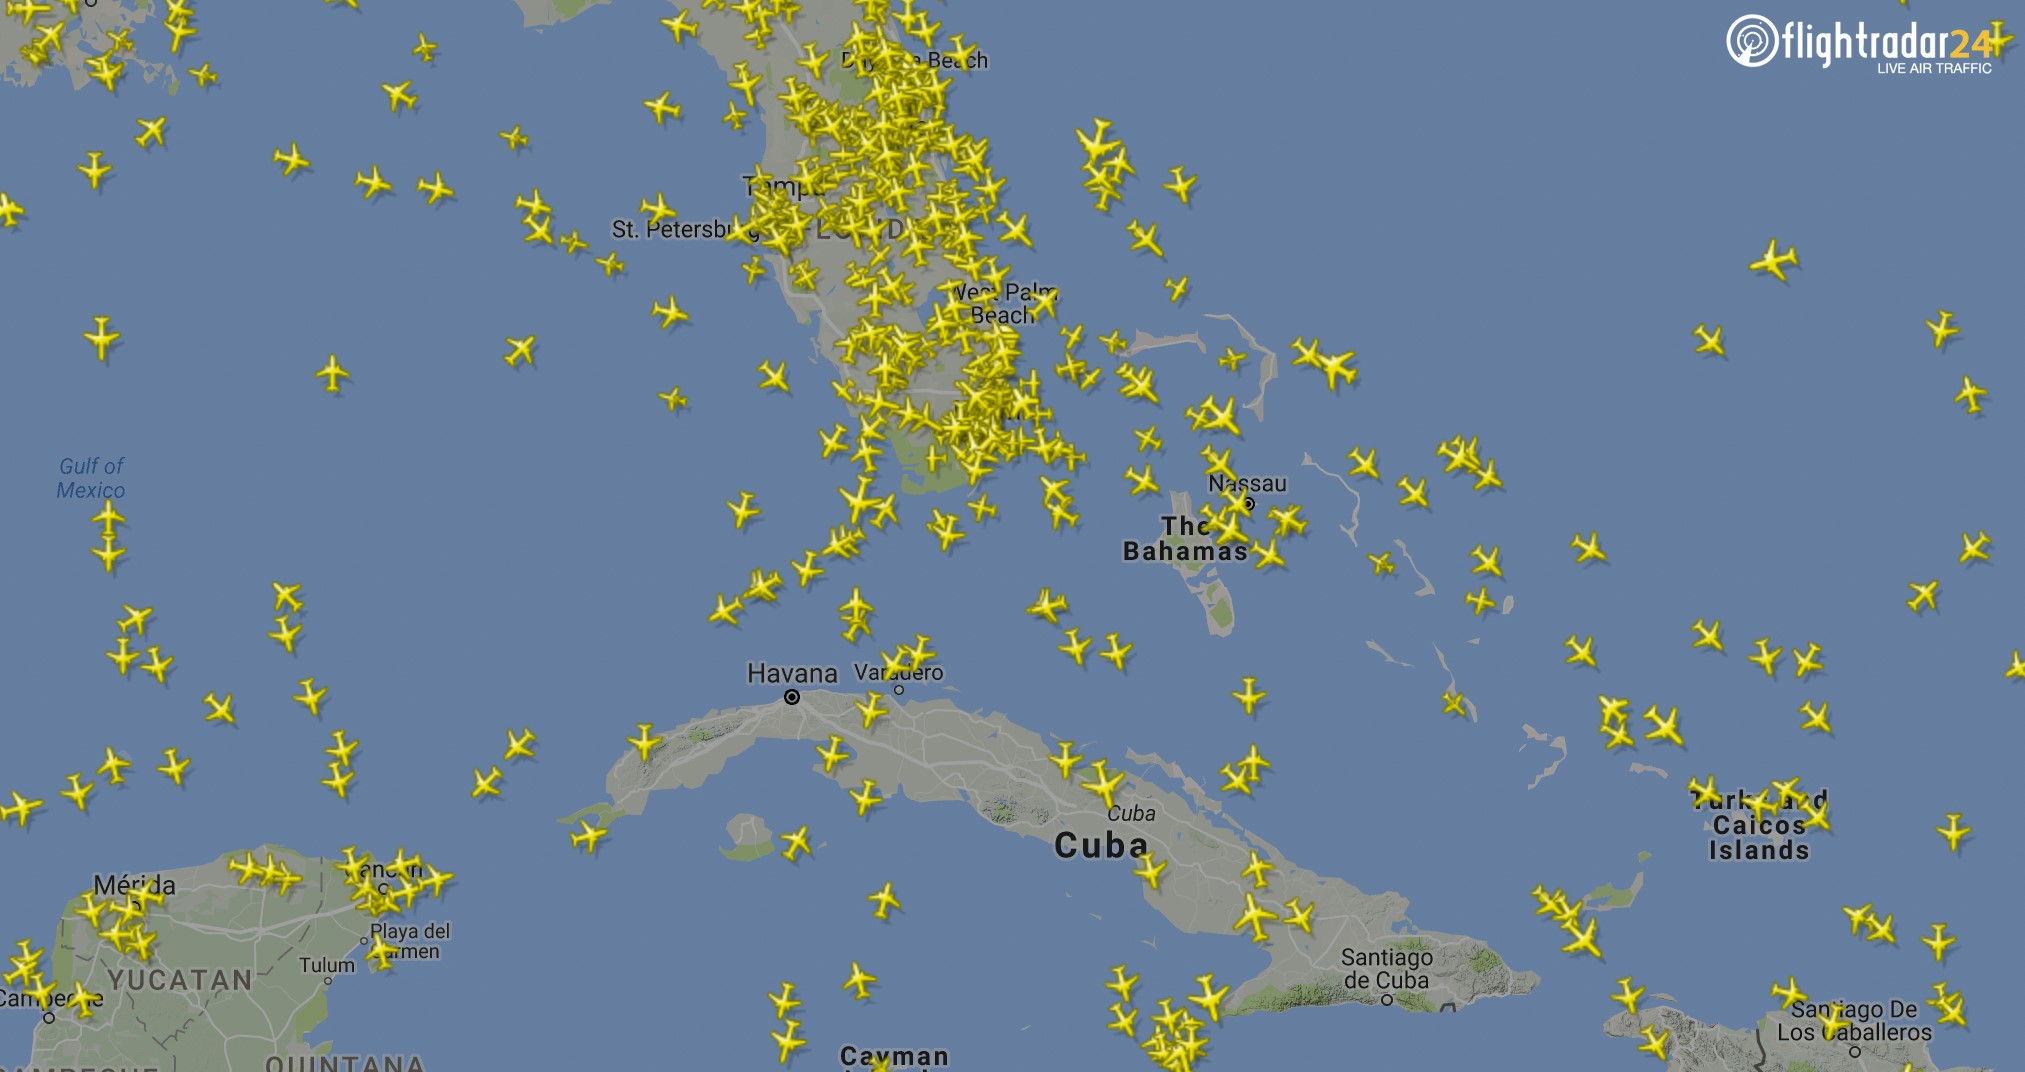 PHOTO: Here is how flight radar looked on a typical Saturday a week ago, on Sept. 2.